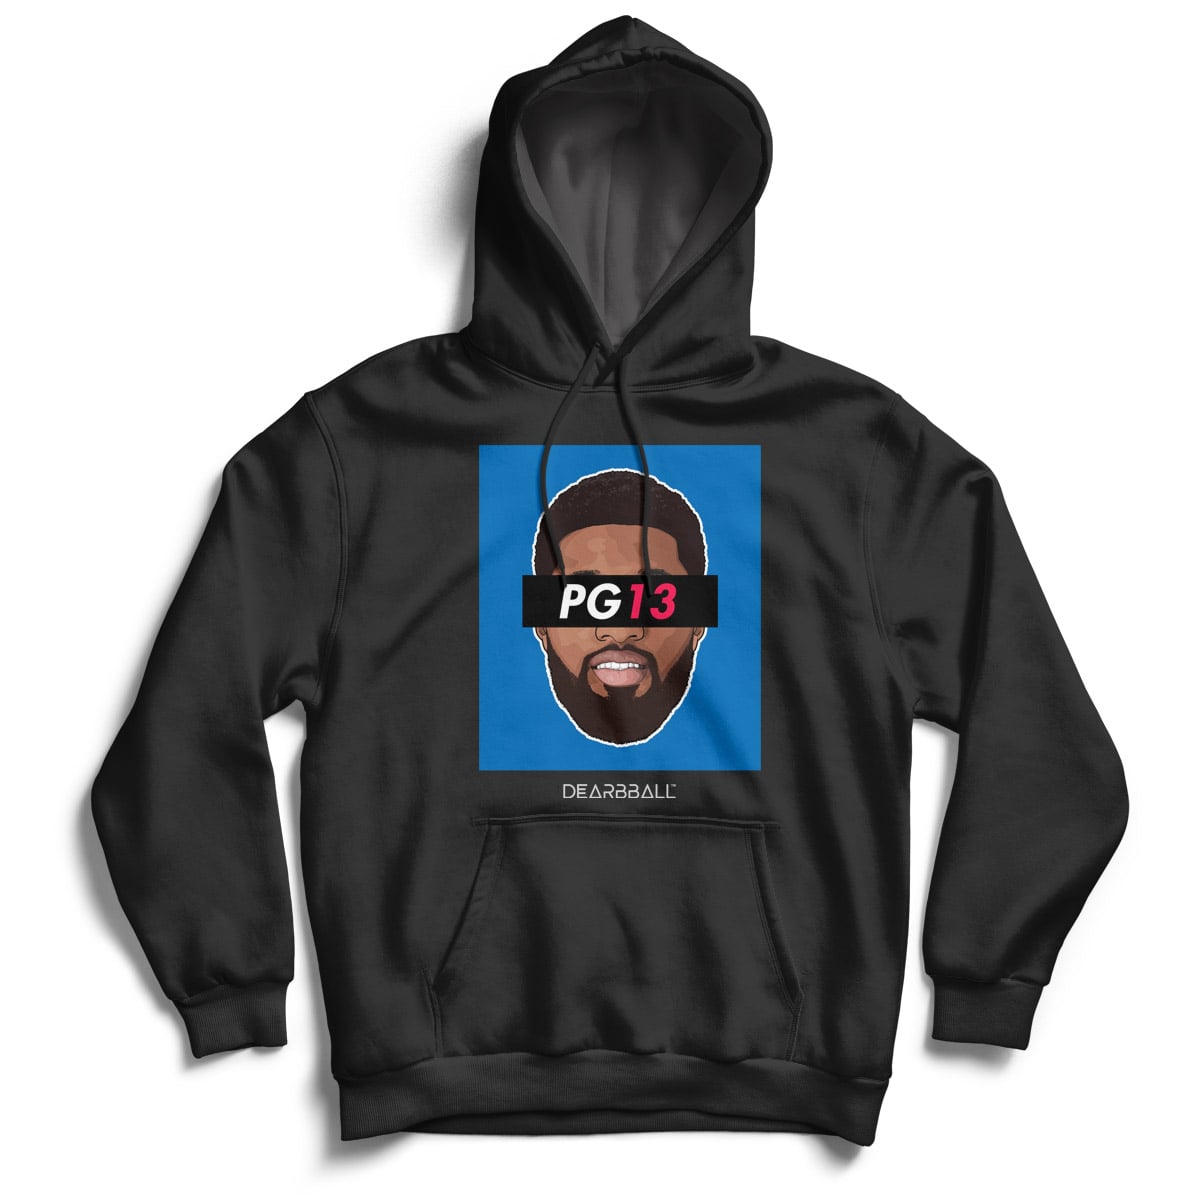 DearBBall Hoodie - PG13 Blue Edition